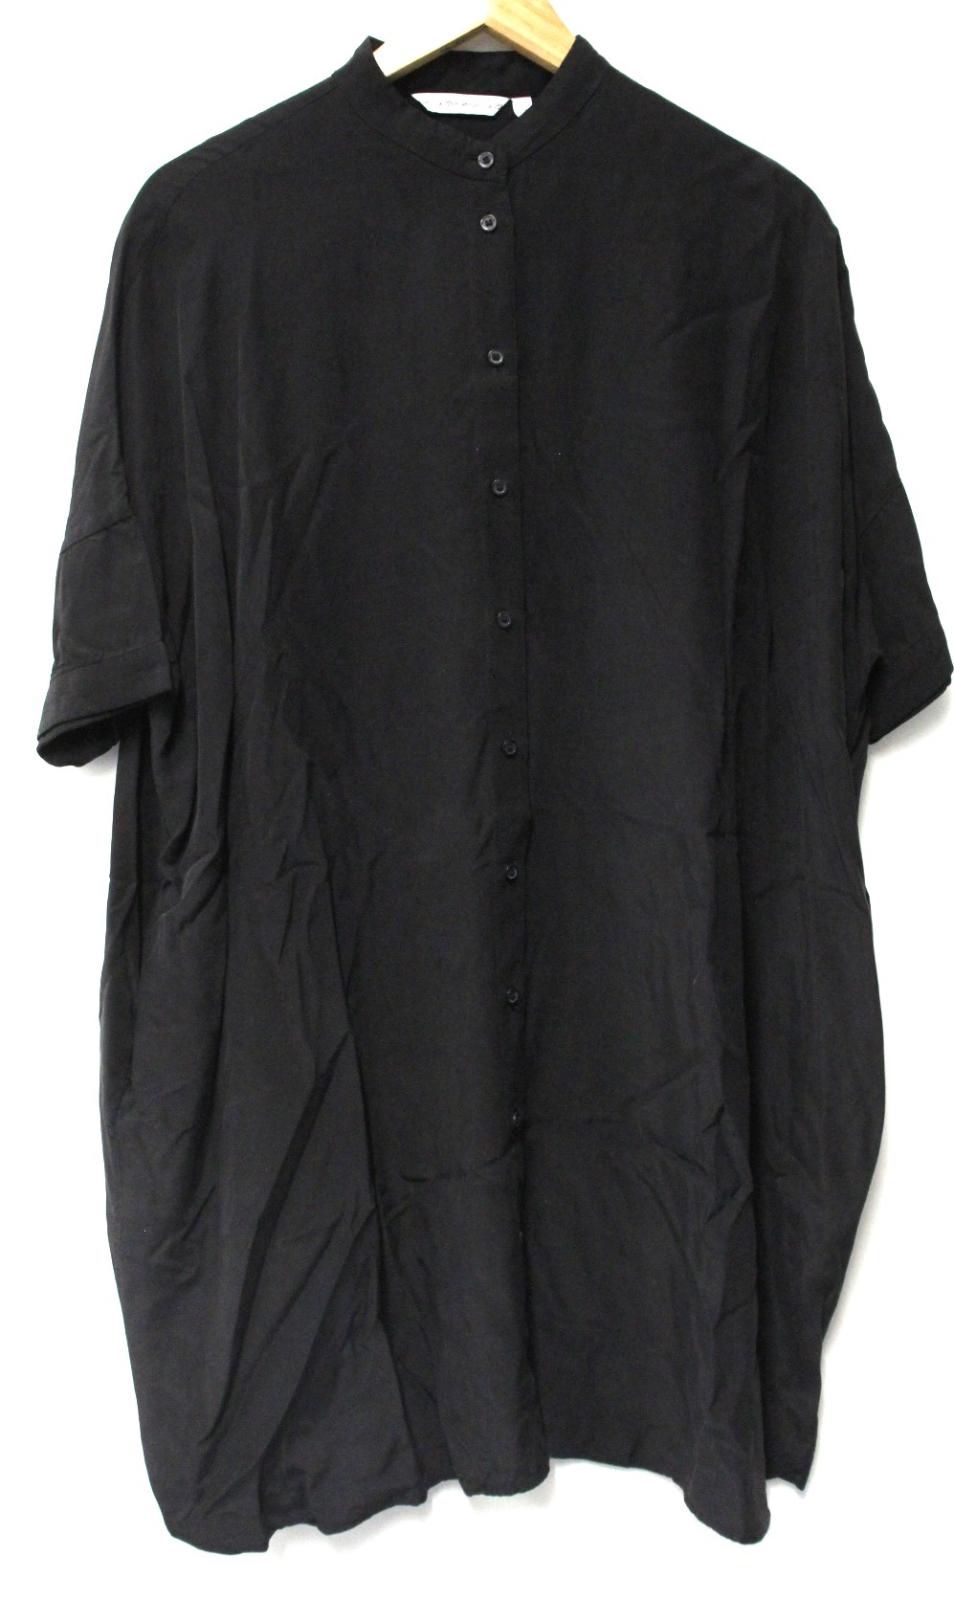 & OTHER STORIES Ladies Black Short Sleeve Button Front Tunic Shirt US8 UK12